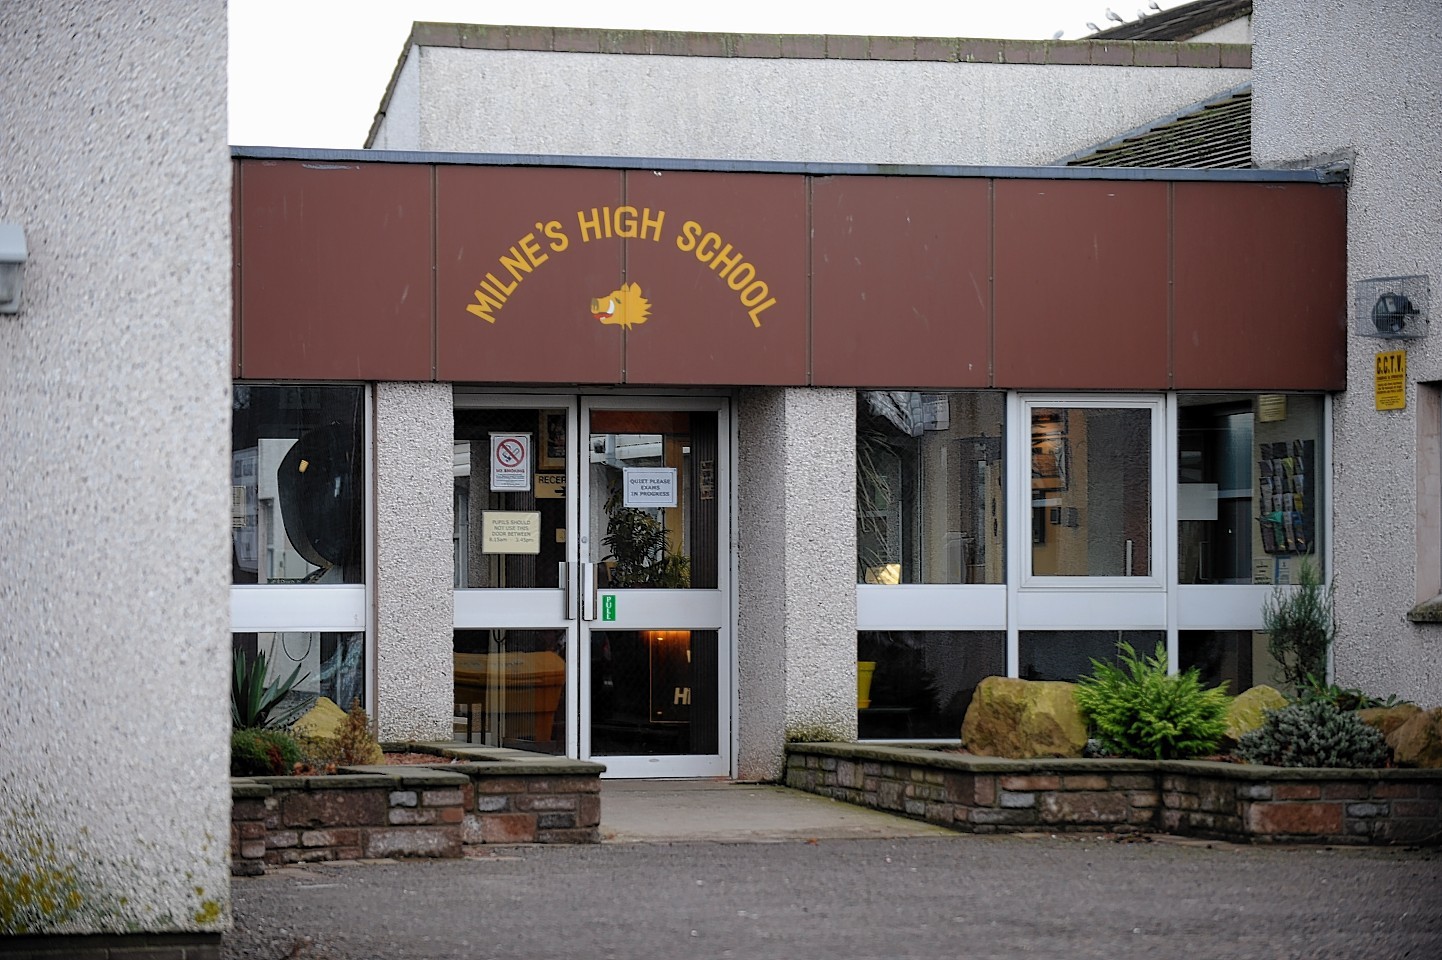 The exterior of Milne High School in Fochabers. Bedding plants are on either side of the door, with a bornw hand-painted sign above the door reading Milne High School. The building is a typical 1970/80s build, that looks a little run down.